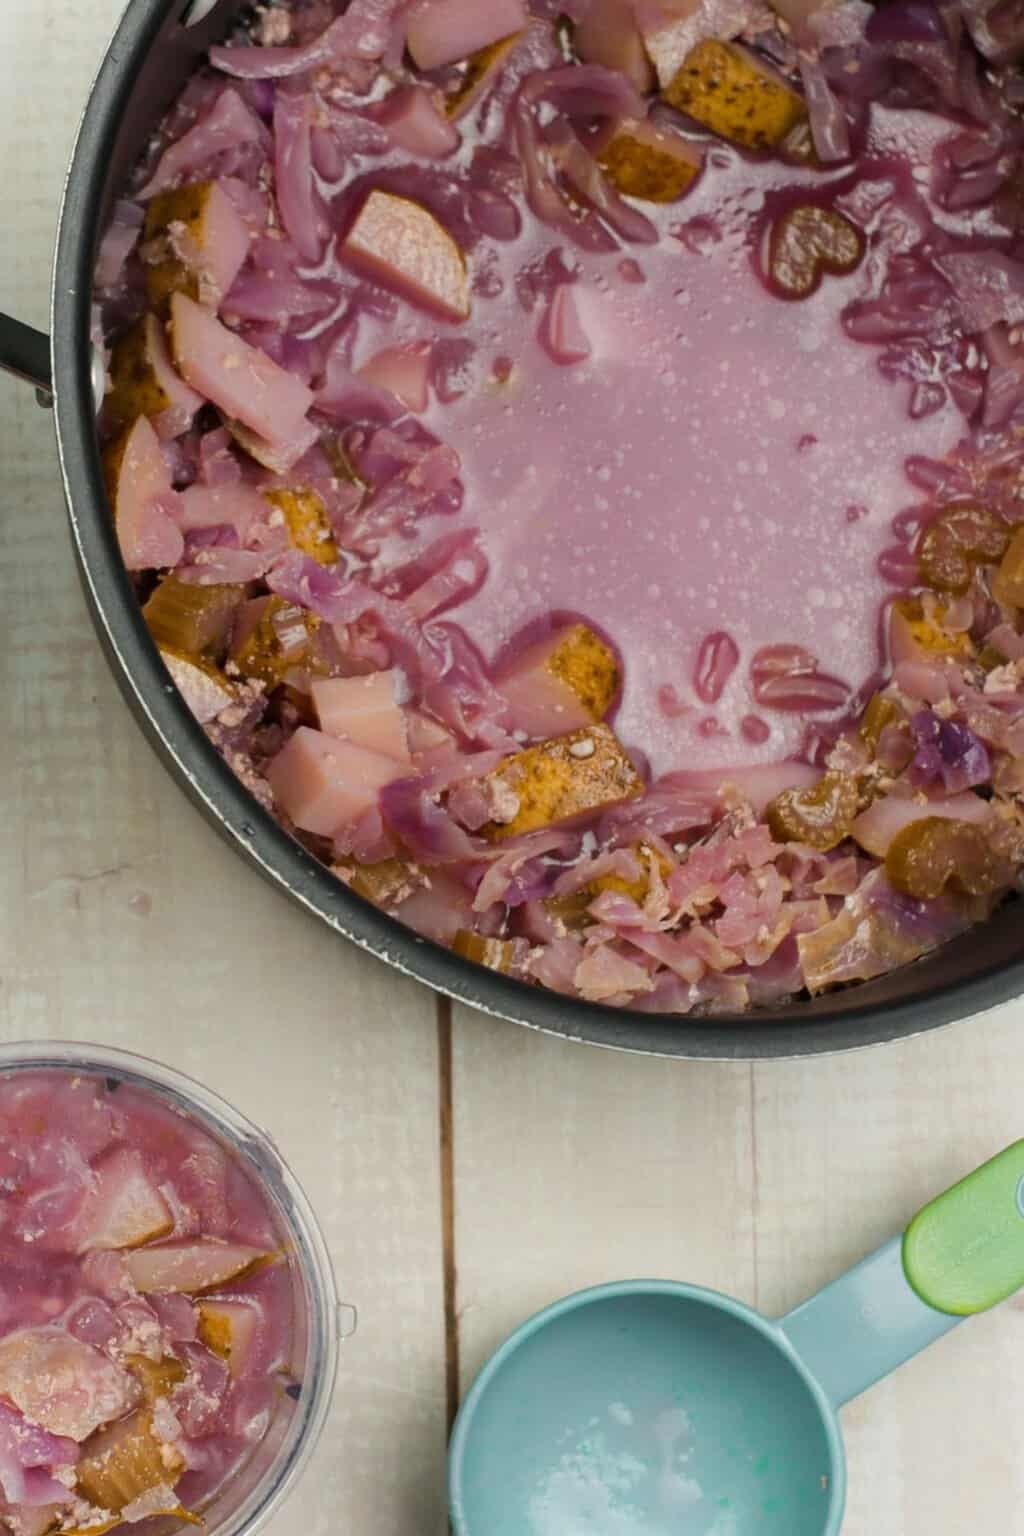 Red cabbage added to the soup.